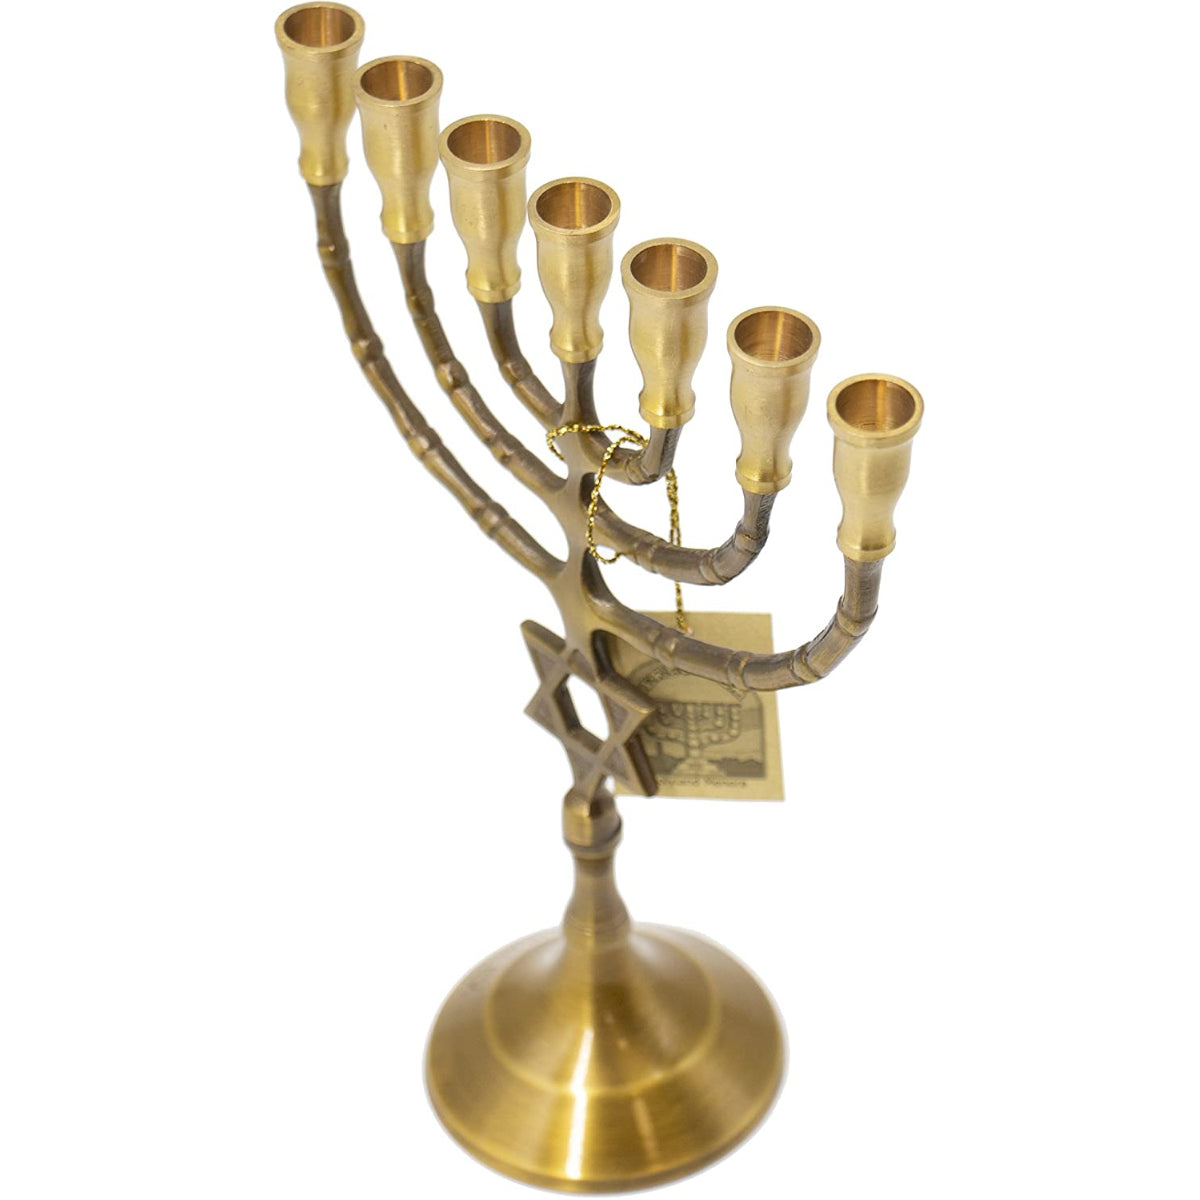 Jerusalem Goliath Menorah Gold Plated from the Holy Land 8.7″ / 22cm